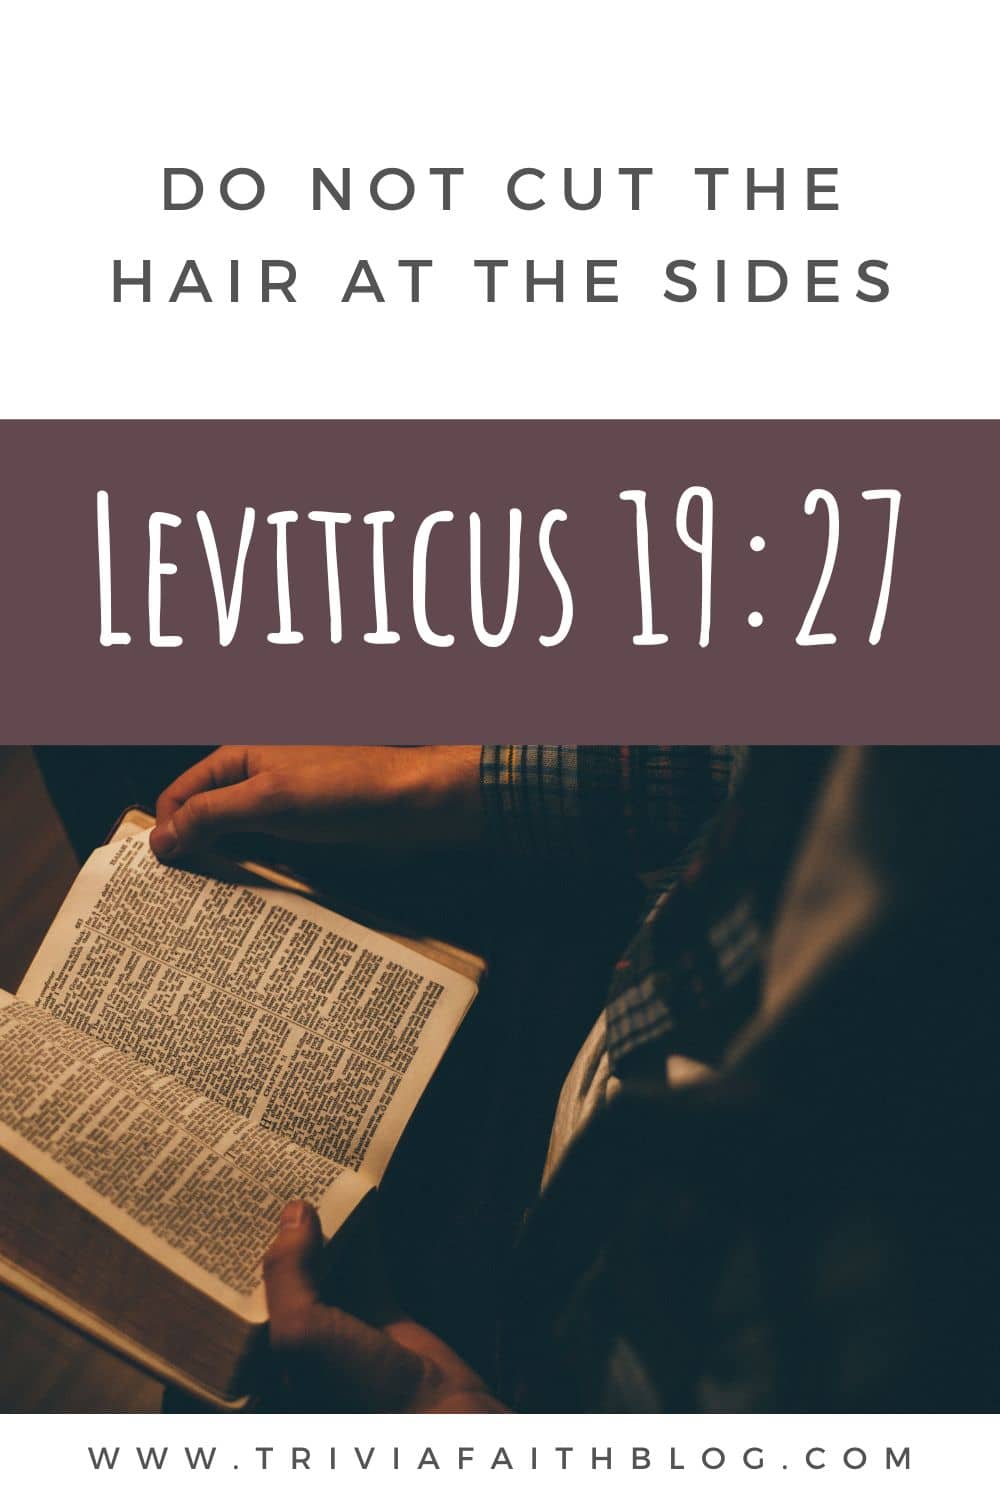 Do Not Cut the Hair At The Sides
Leviticus 19:27 meaning